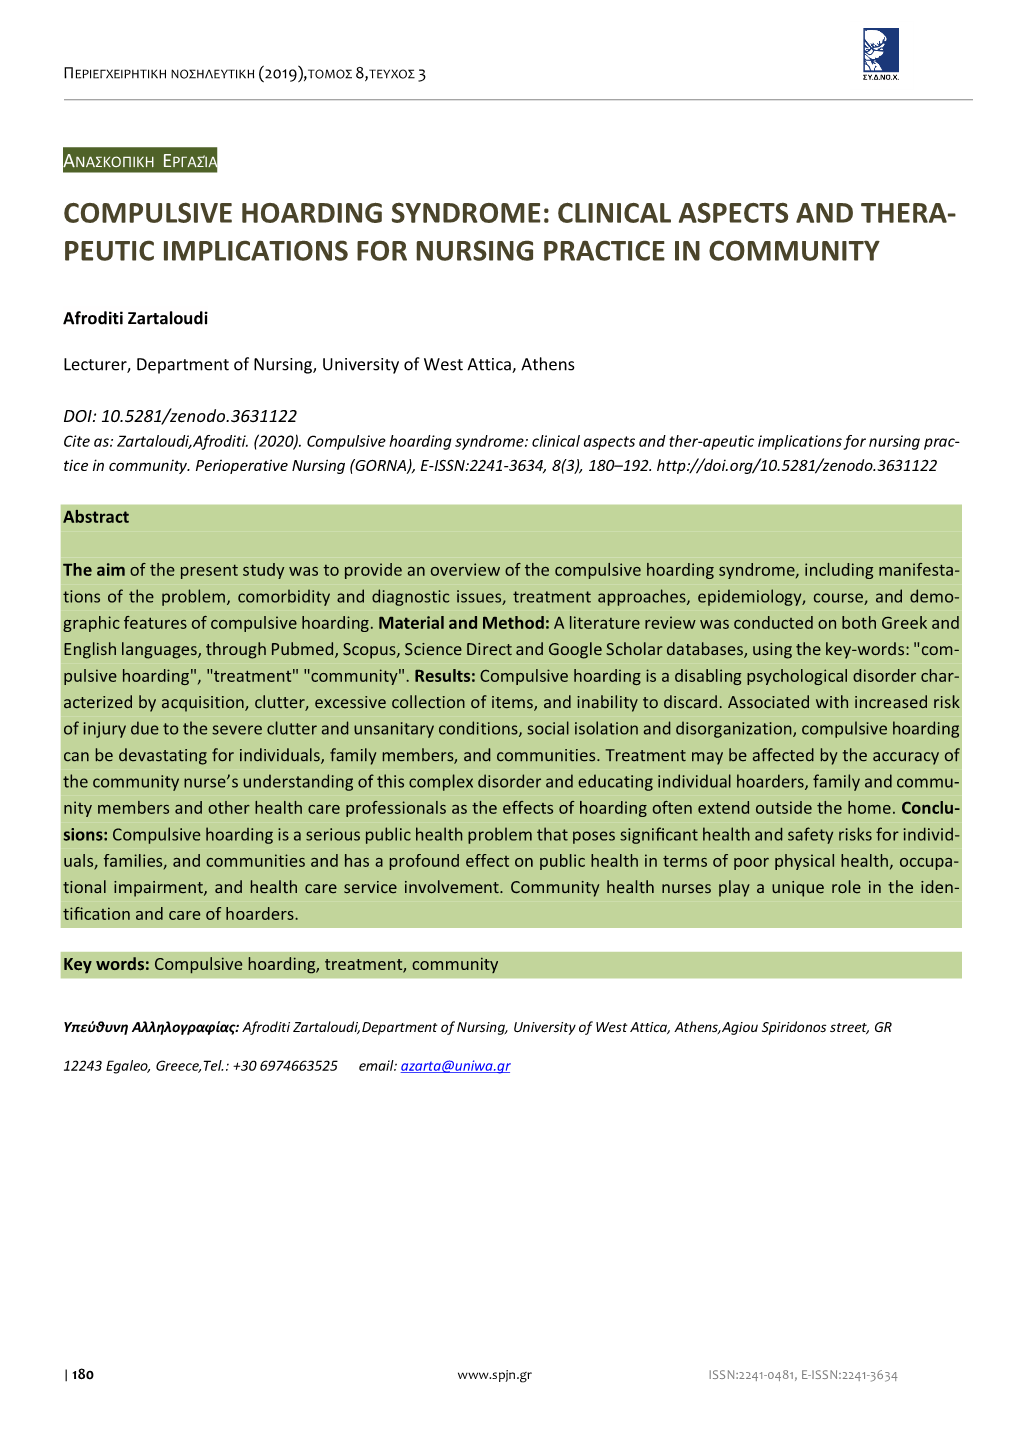 Compulsive Hoarding Syndrome: Clinical Aspects and Thera- Peutic Implications for Nursing Practice in Community